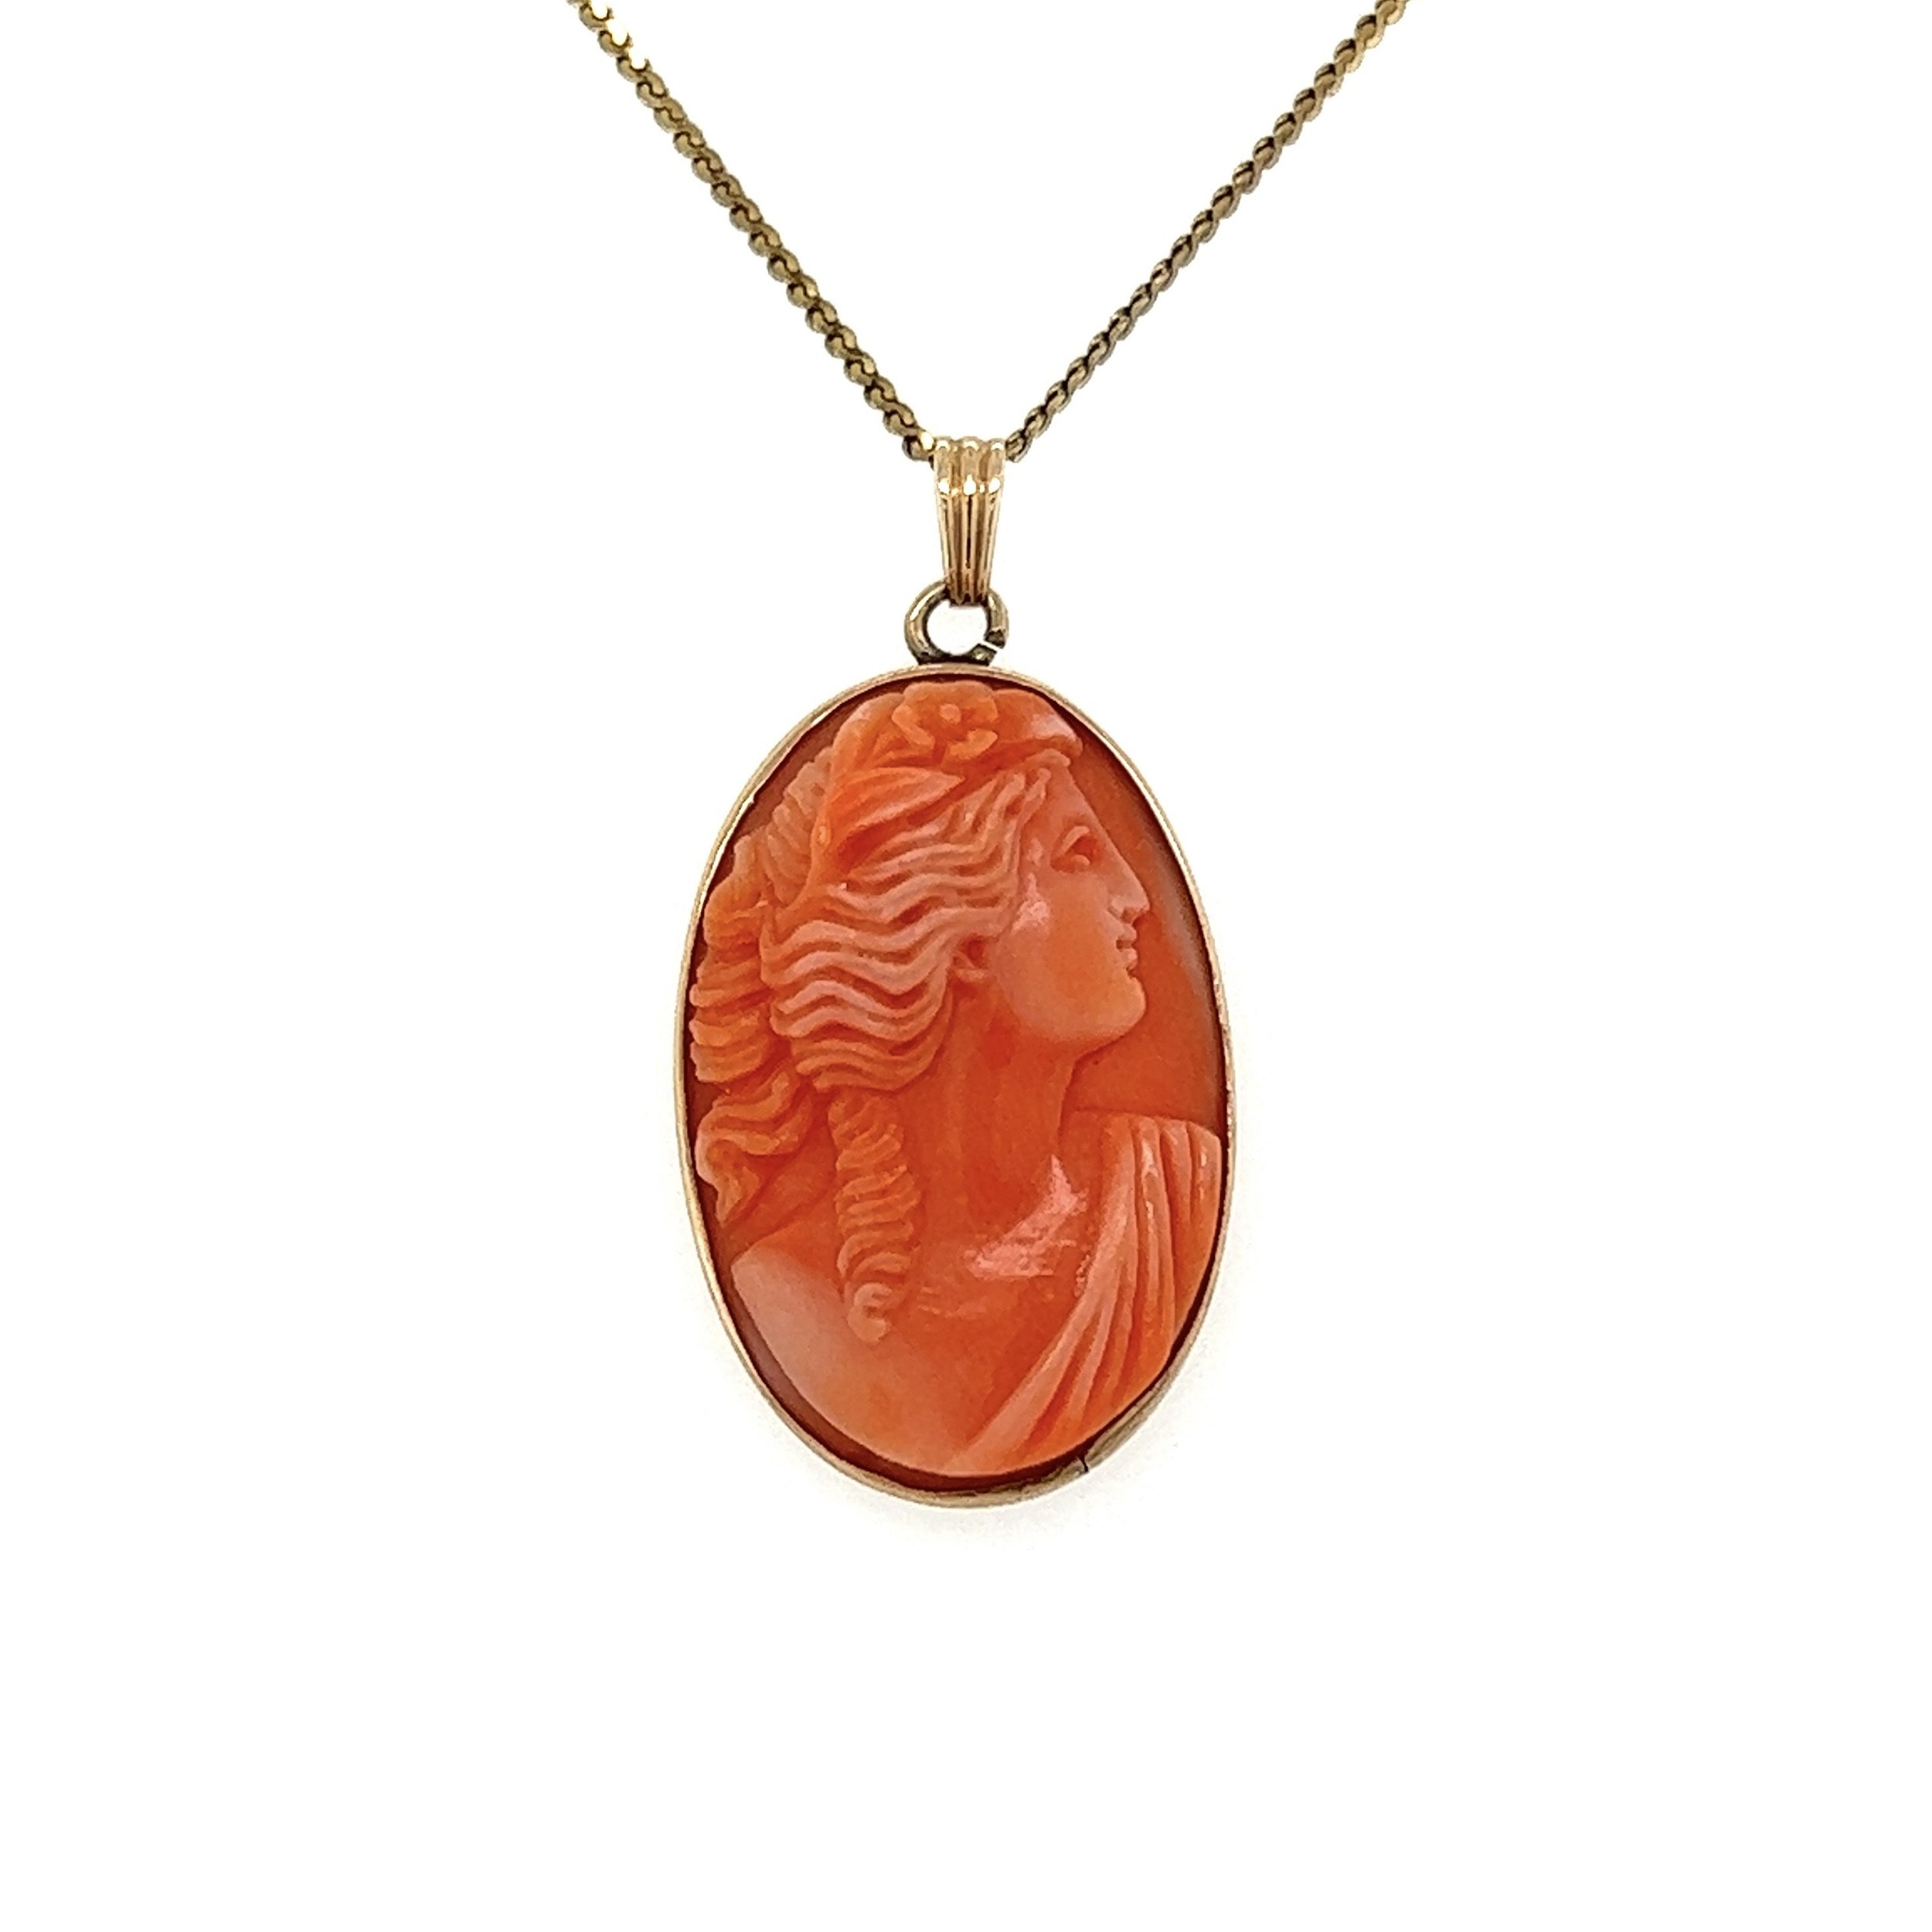 10K YG Victorian Carved 30mm Coral Cameo Necklace on 14K Chain 3.9g, 17"